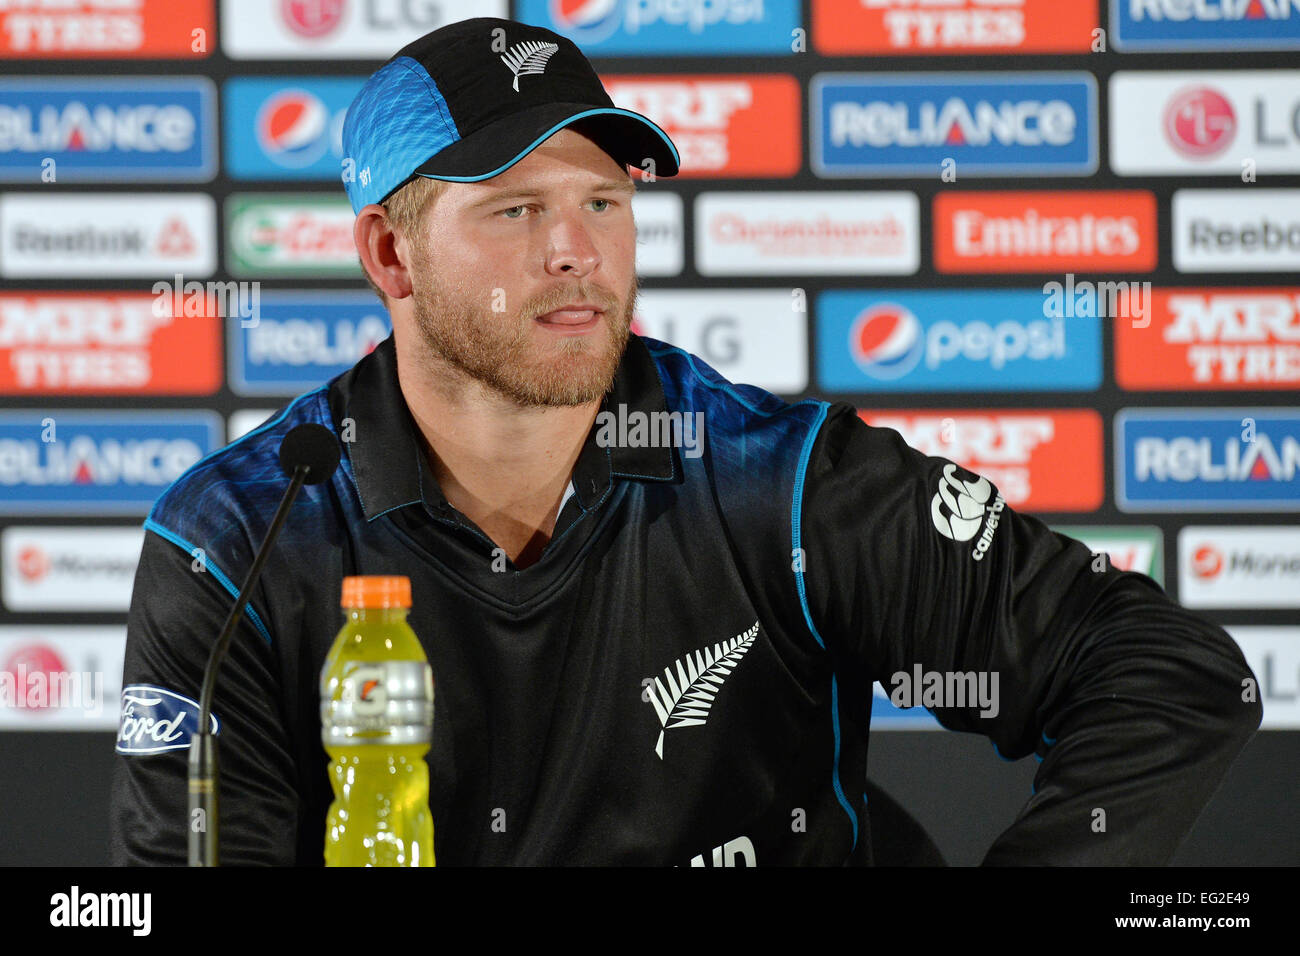 Christchurch, New Zealand. 14th Feb, 2015. Christchurch, New Zealand - February 14, 2015 - Corey Anderson of New Zealand during the press conference after the ICC Cricket World Cup Match between Sri Lanka and New Zealand at Hagley Oval on February 14, 2015 in Christchurch, New Zealand. © dpa/Alamy Live News Stock Photo